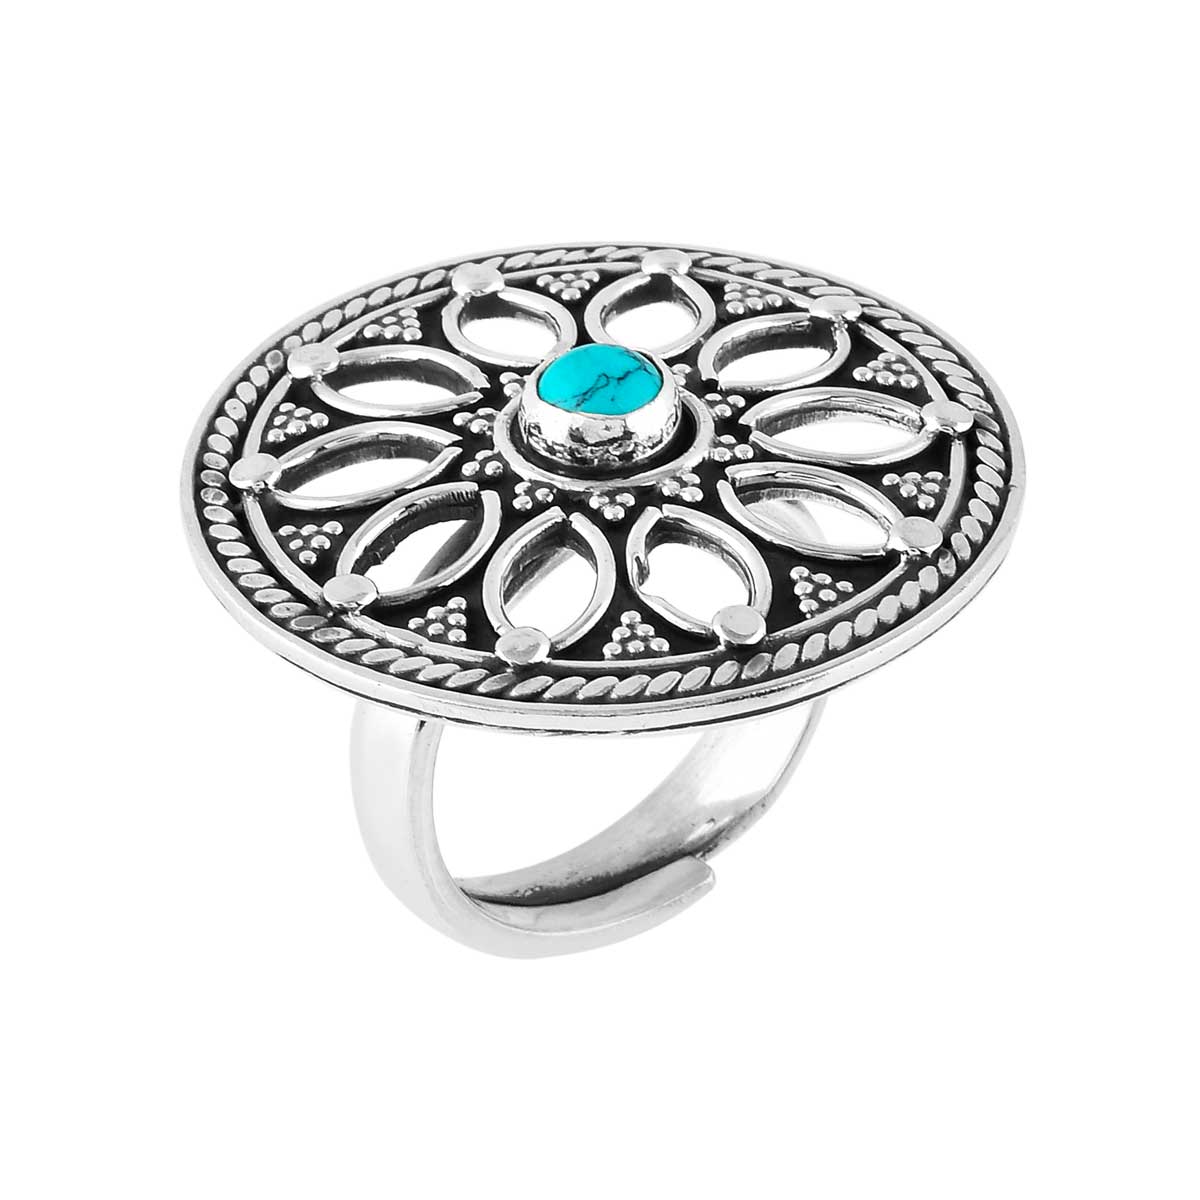 Turquoise Floral 925 Silver Adjustable Ring-2